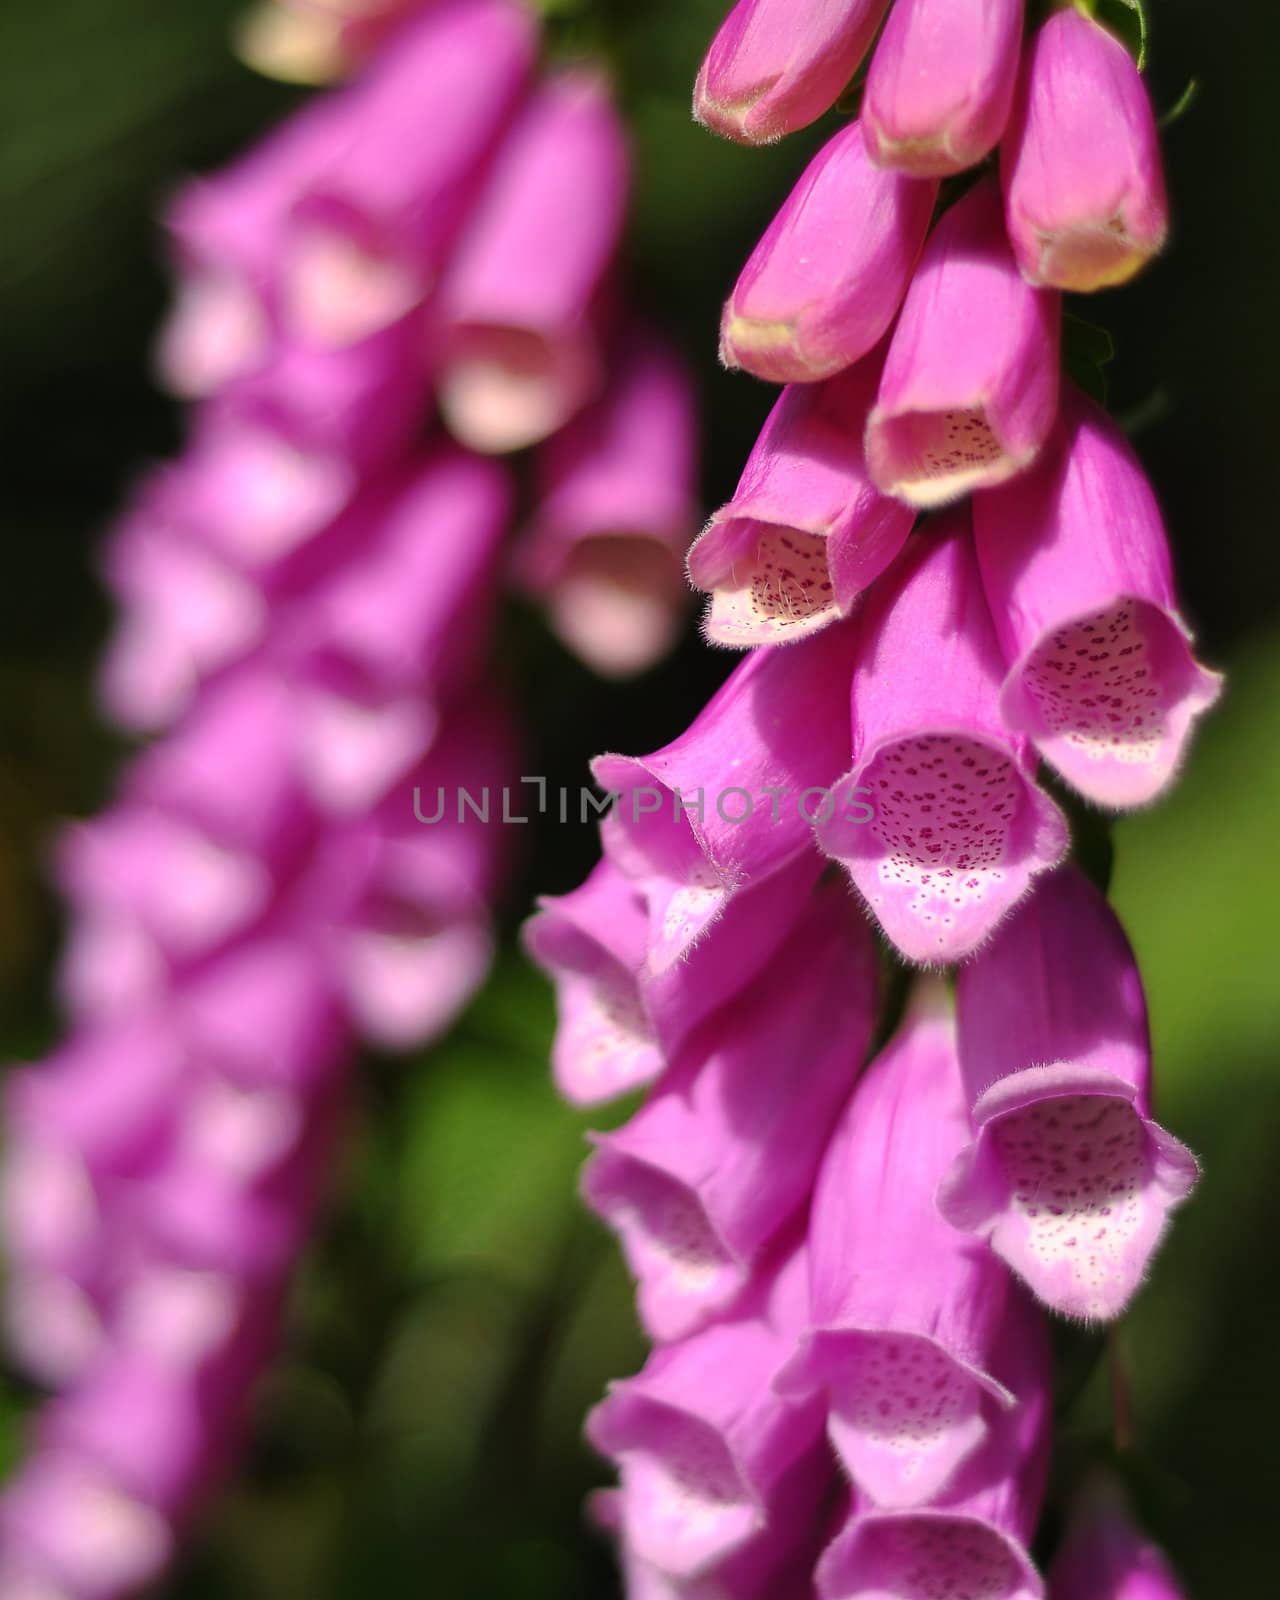 Foxglove flowers, in focus on the right and out of focus on the left.